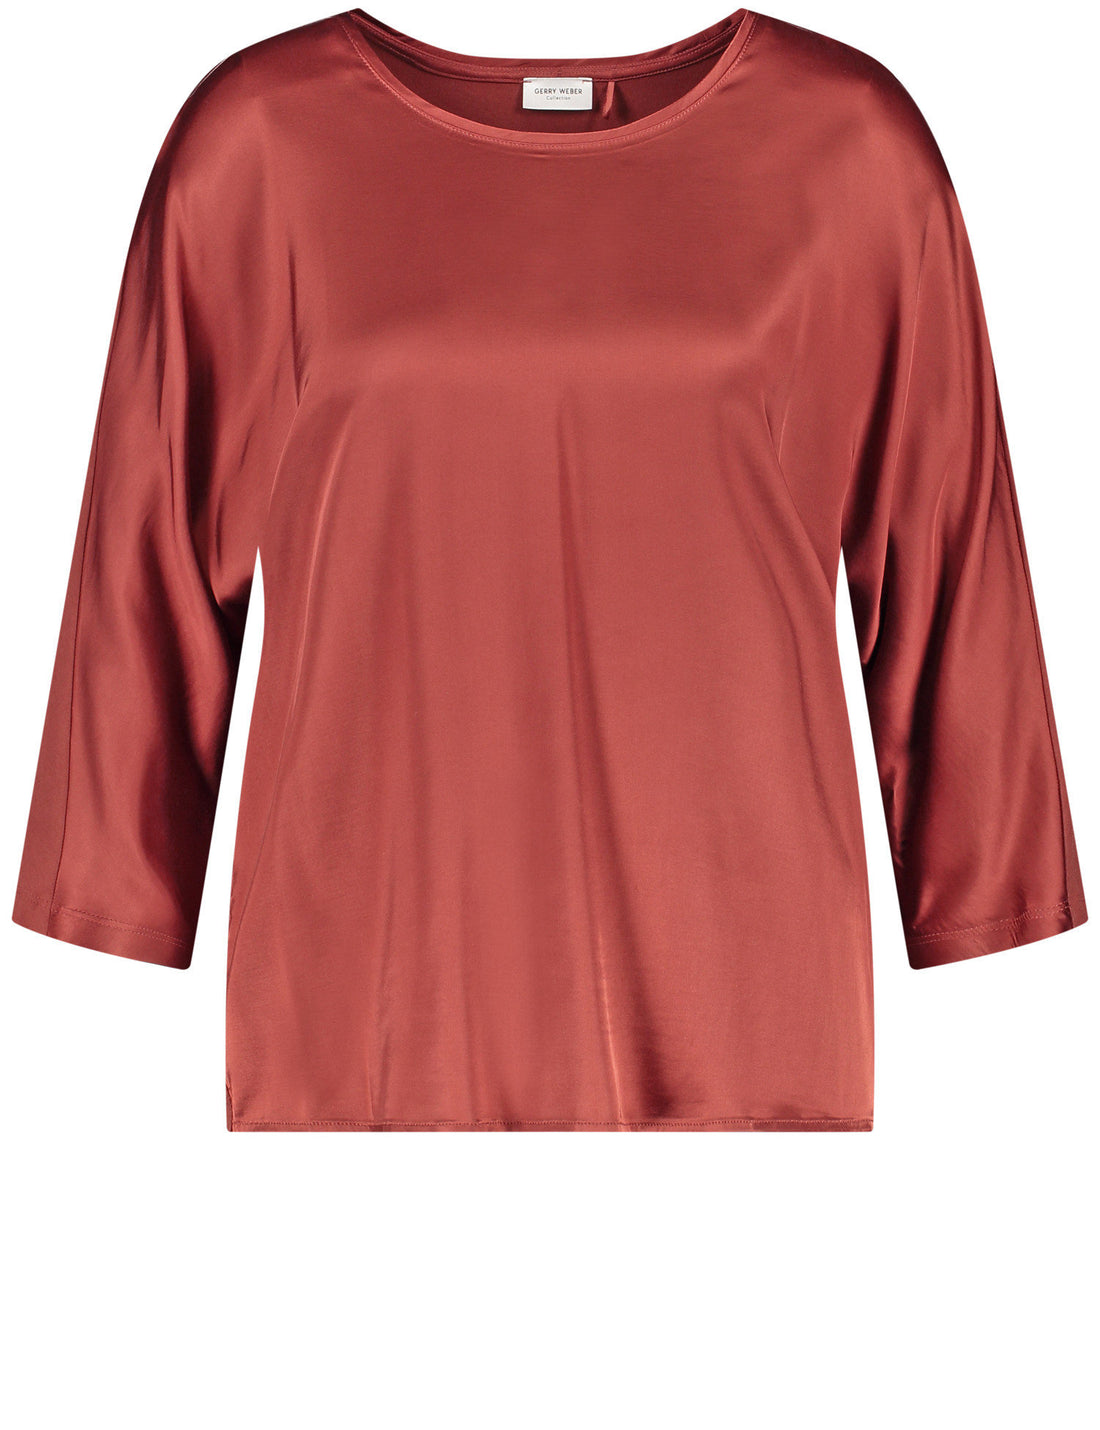 3/4 Sleeve Top With A Fabric Panel And A Subtle Sheen_270229-35033_60703_02